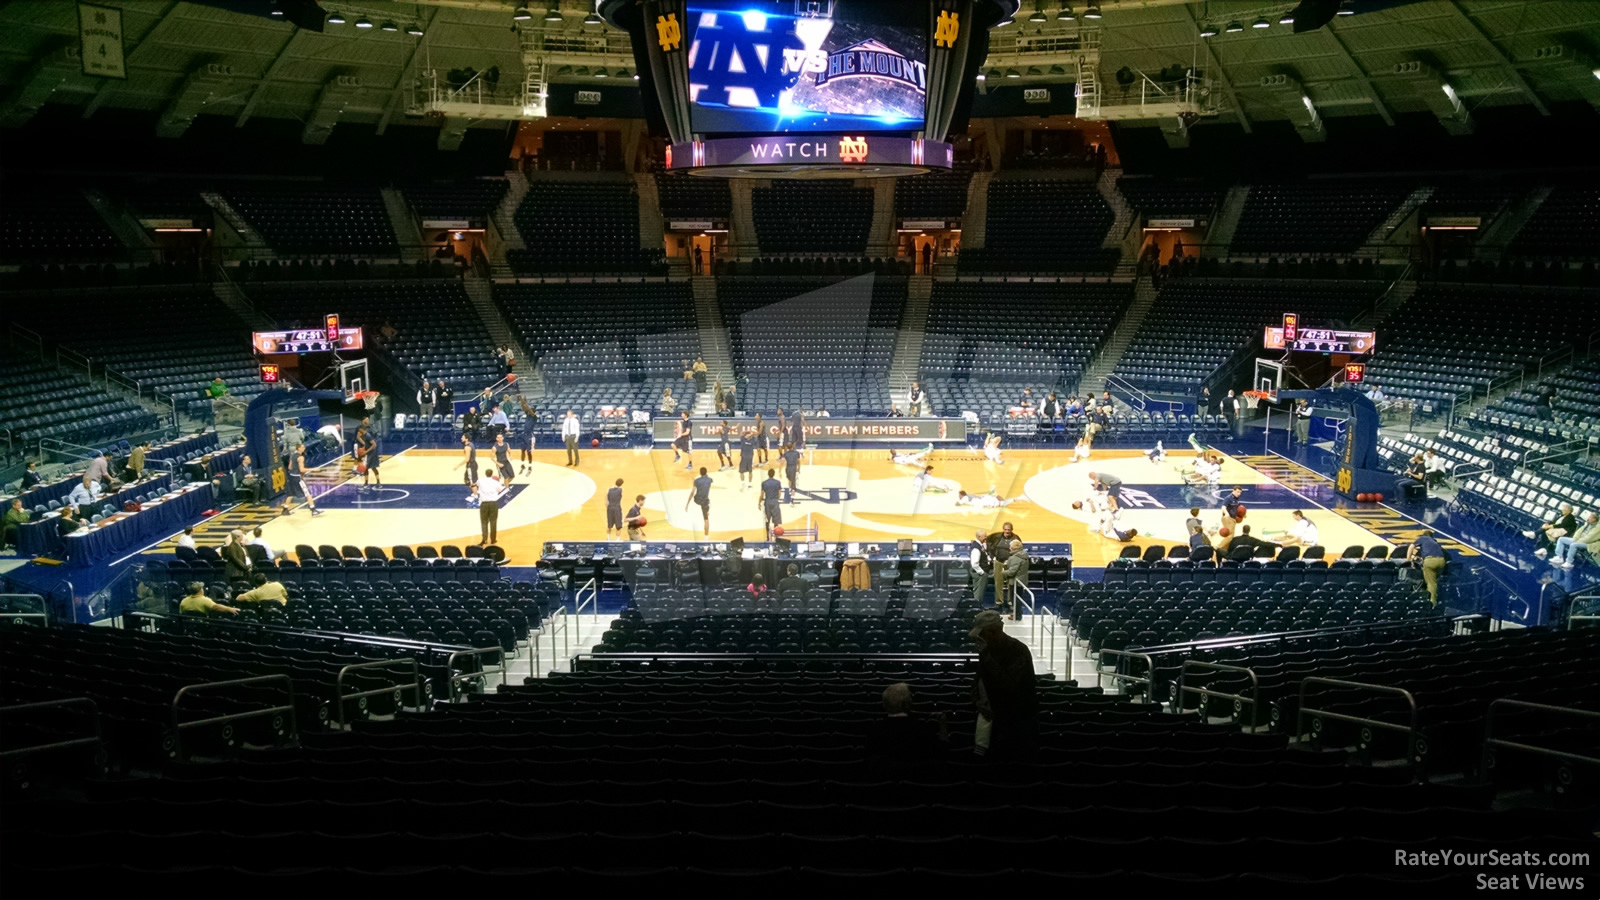 section 110, row 3 seat view  - joyce center